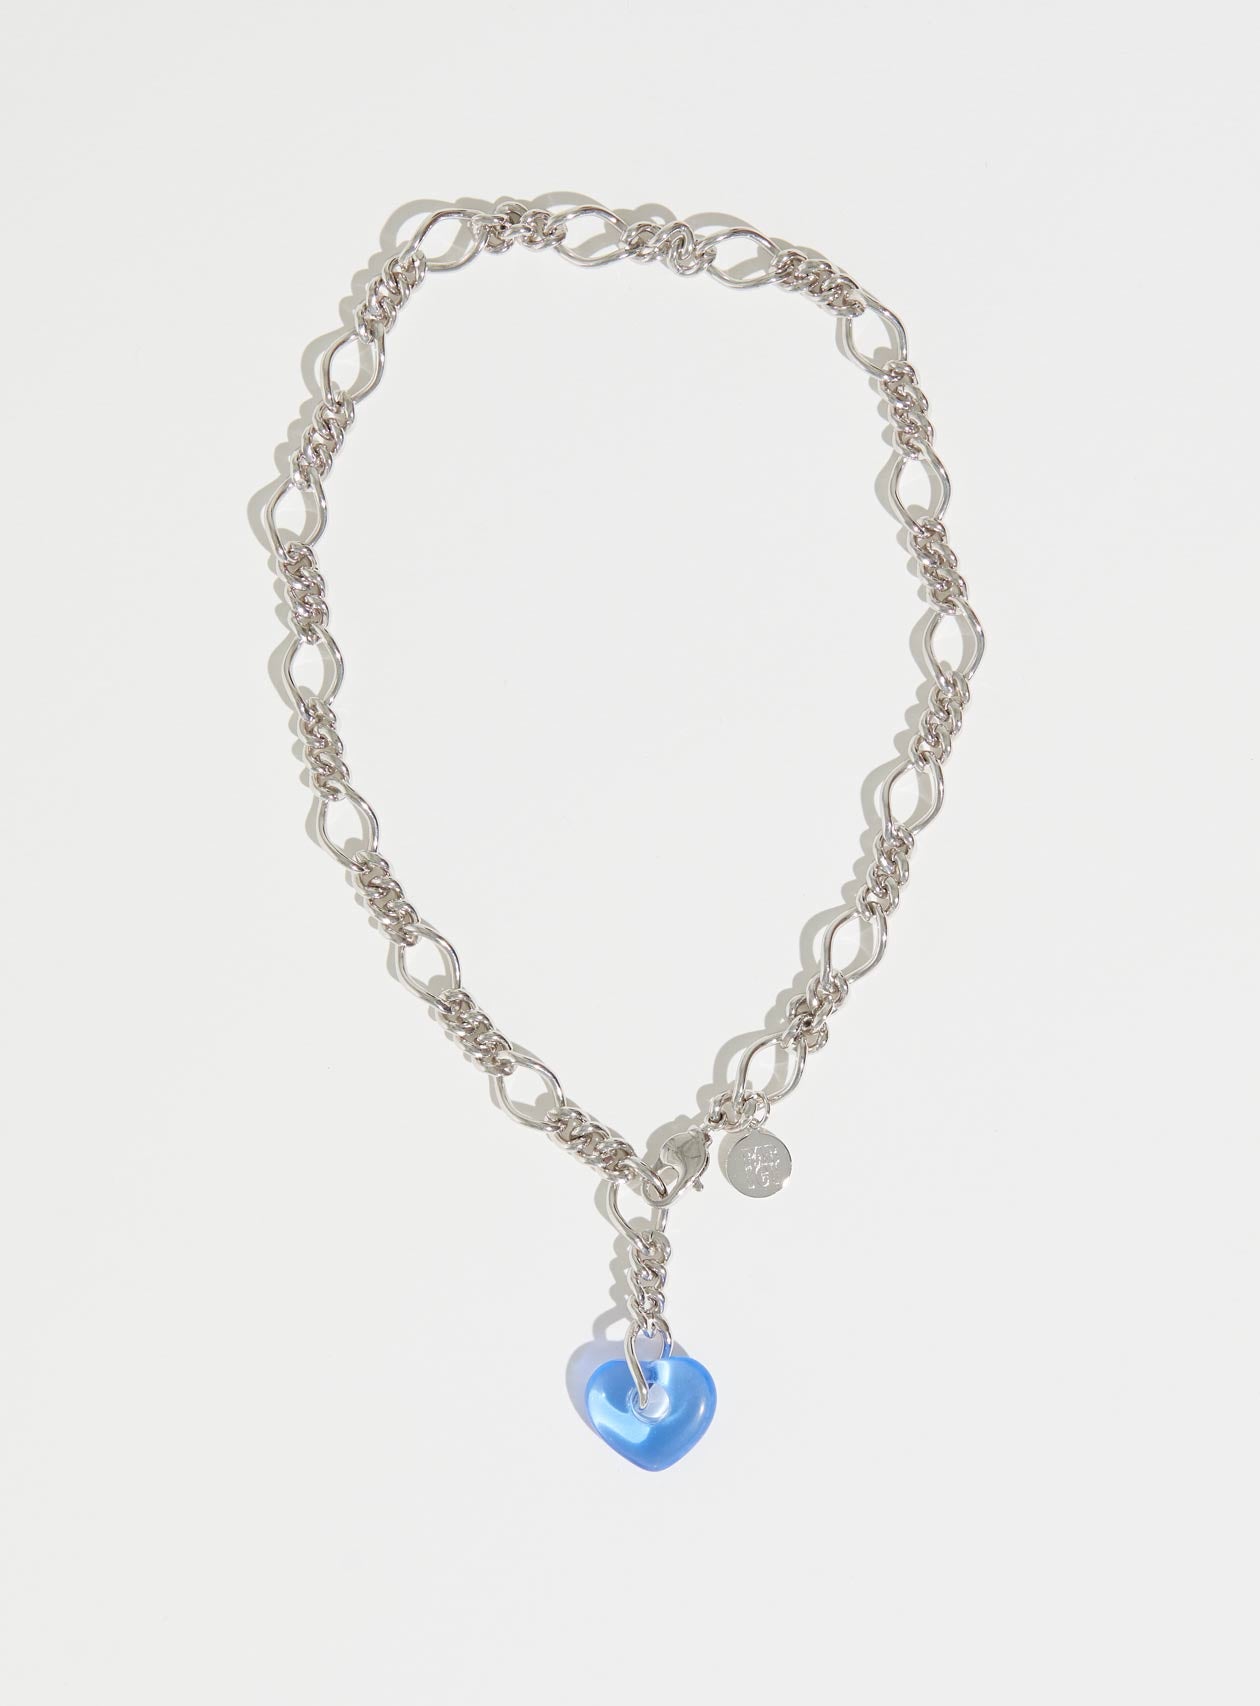 Chunky silver chain necklace with baby blue Czech glass heart